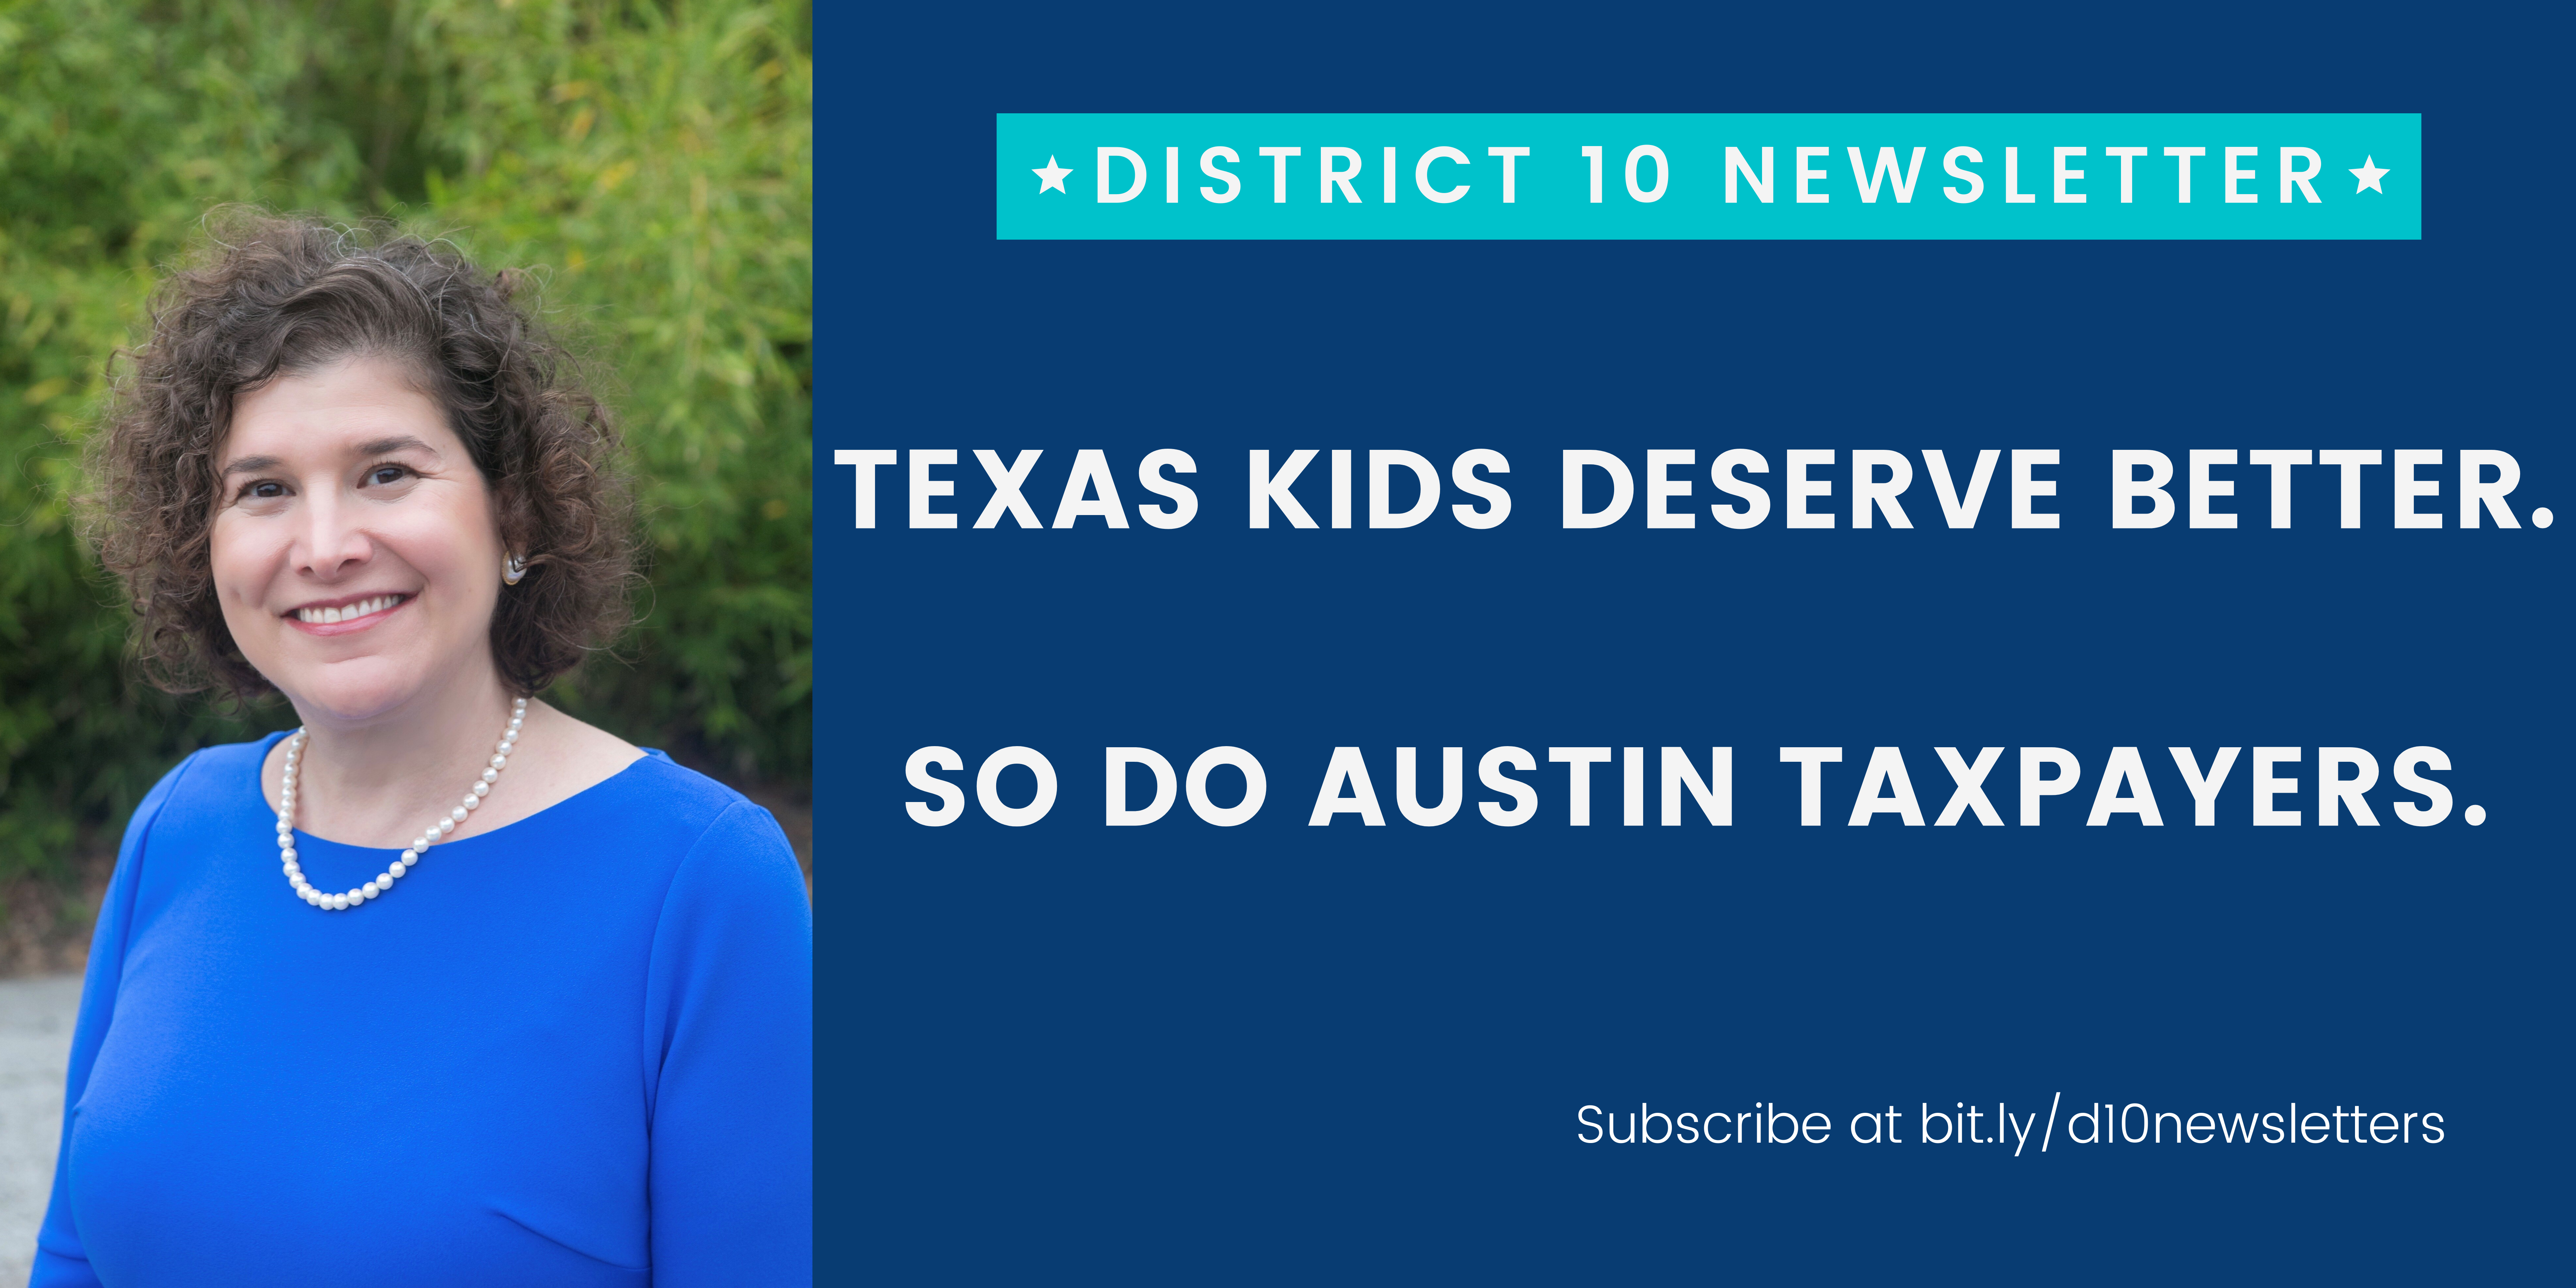 texas kids deserve better and so do austin taxpayers